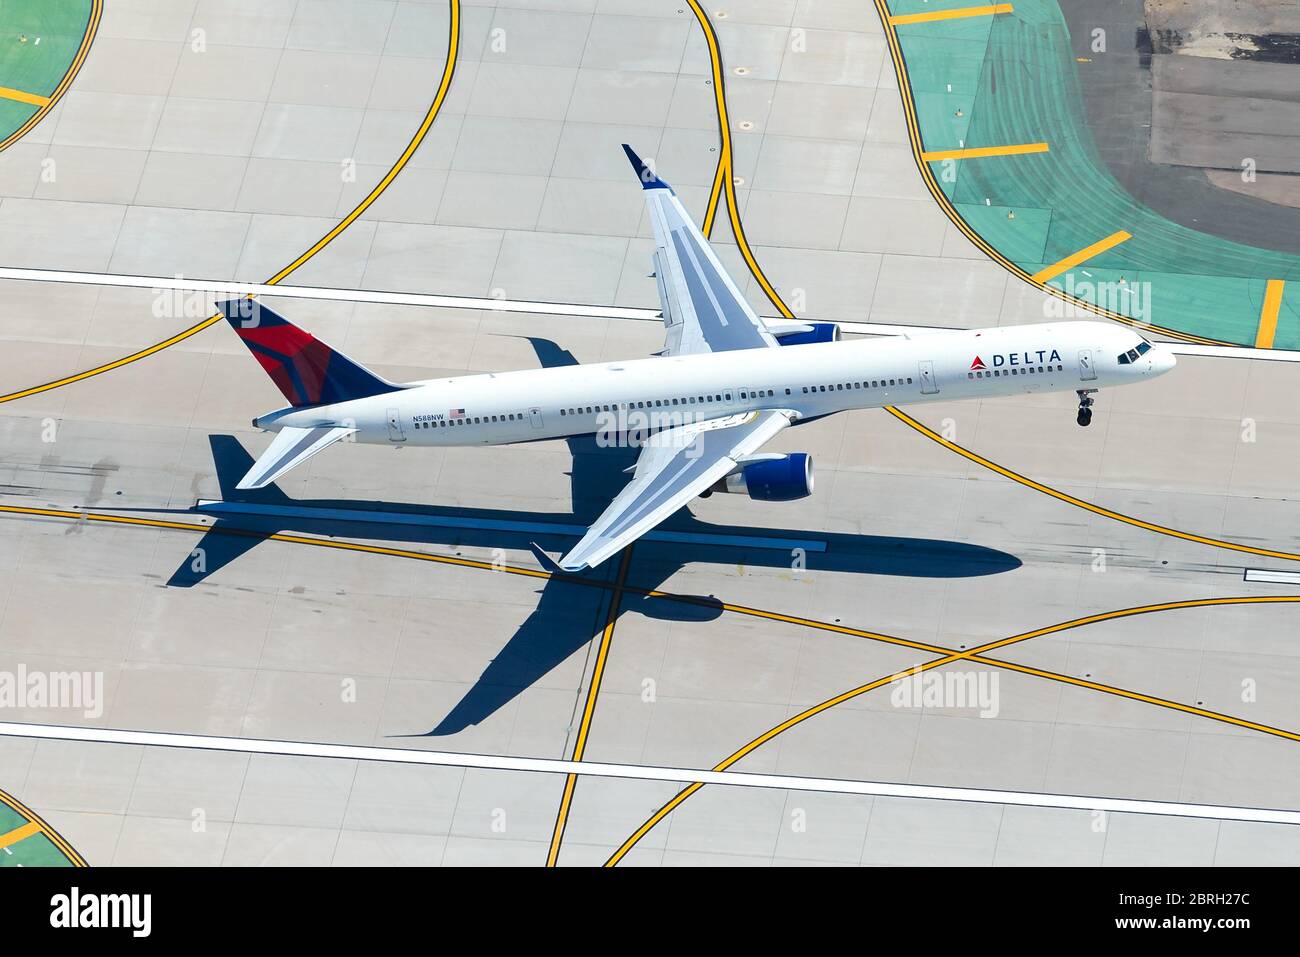 Delta Airlines Boeing 757 departing LAX International Airport. Aerial view of aircraft take off with airport taxiway lines. Domestic air travel in USA Stock Photo